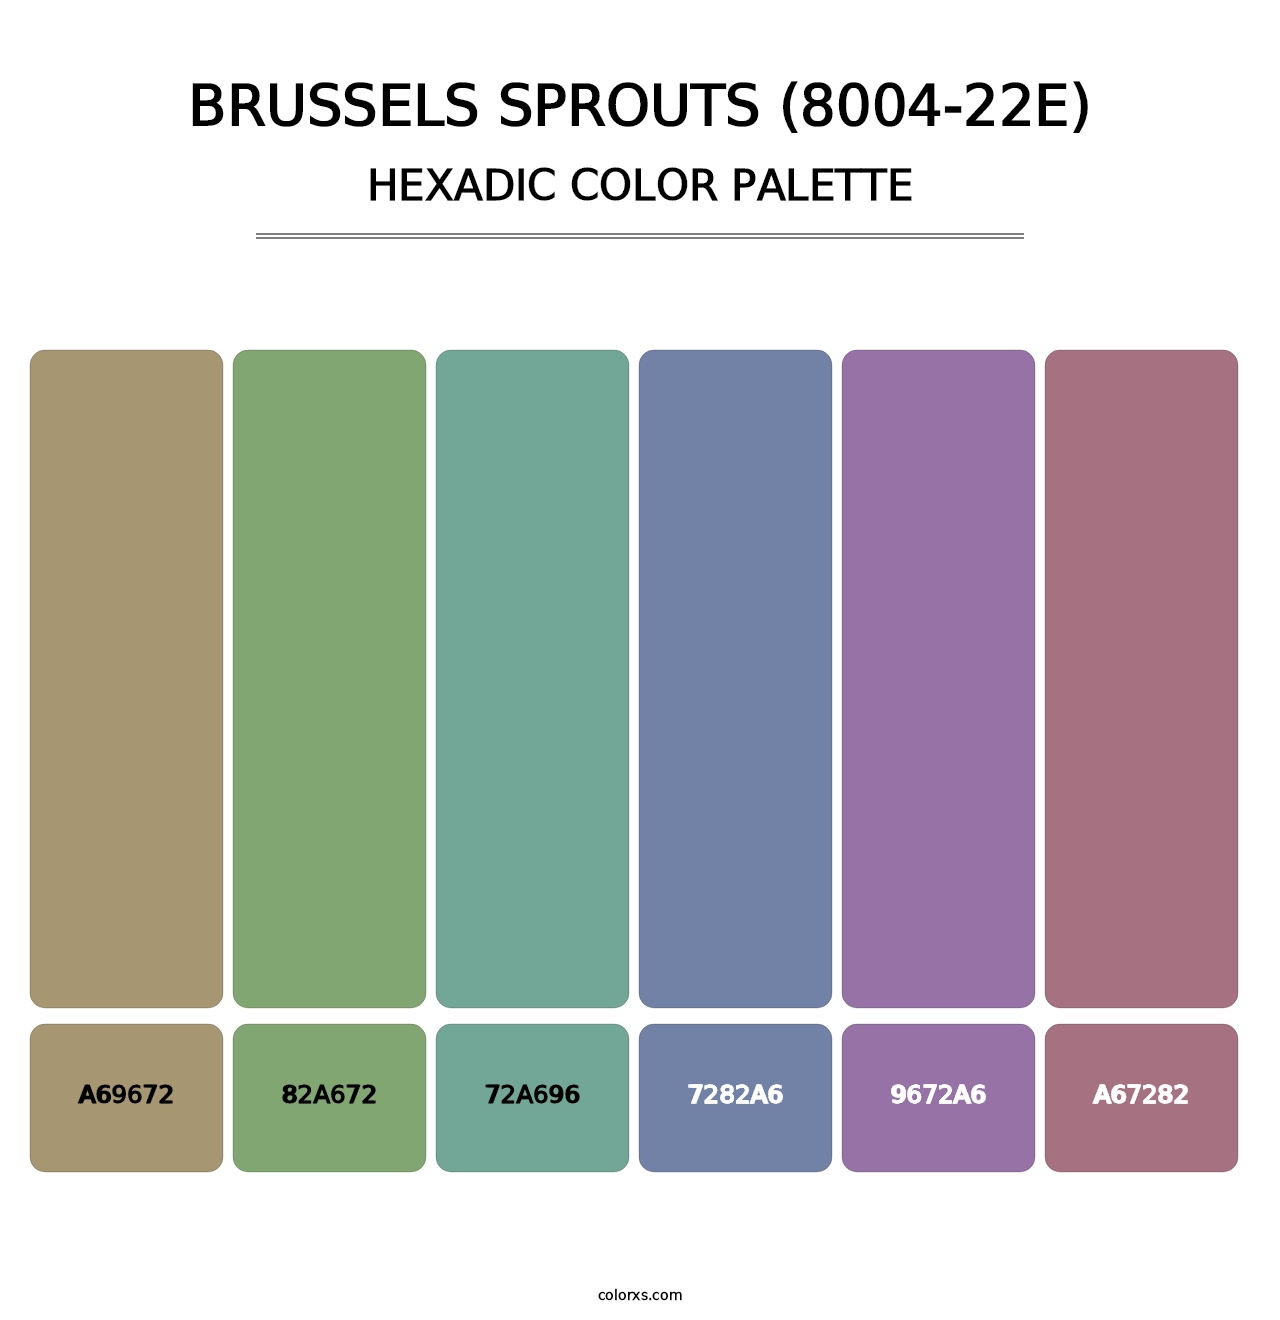 Brussels Sprouts (8004-22E) - Hexadic Color Palette